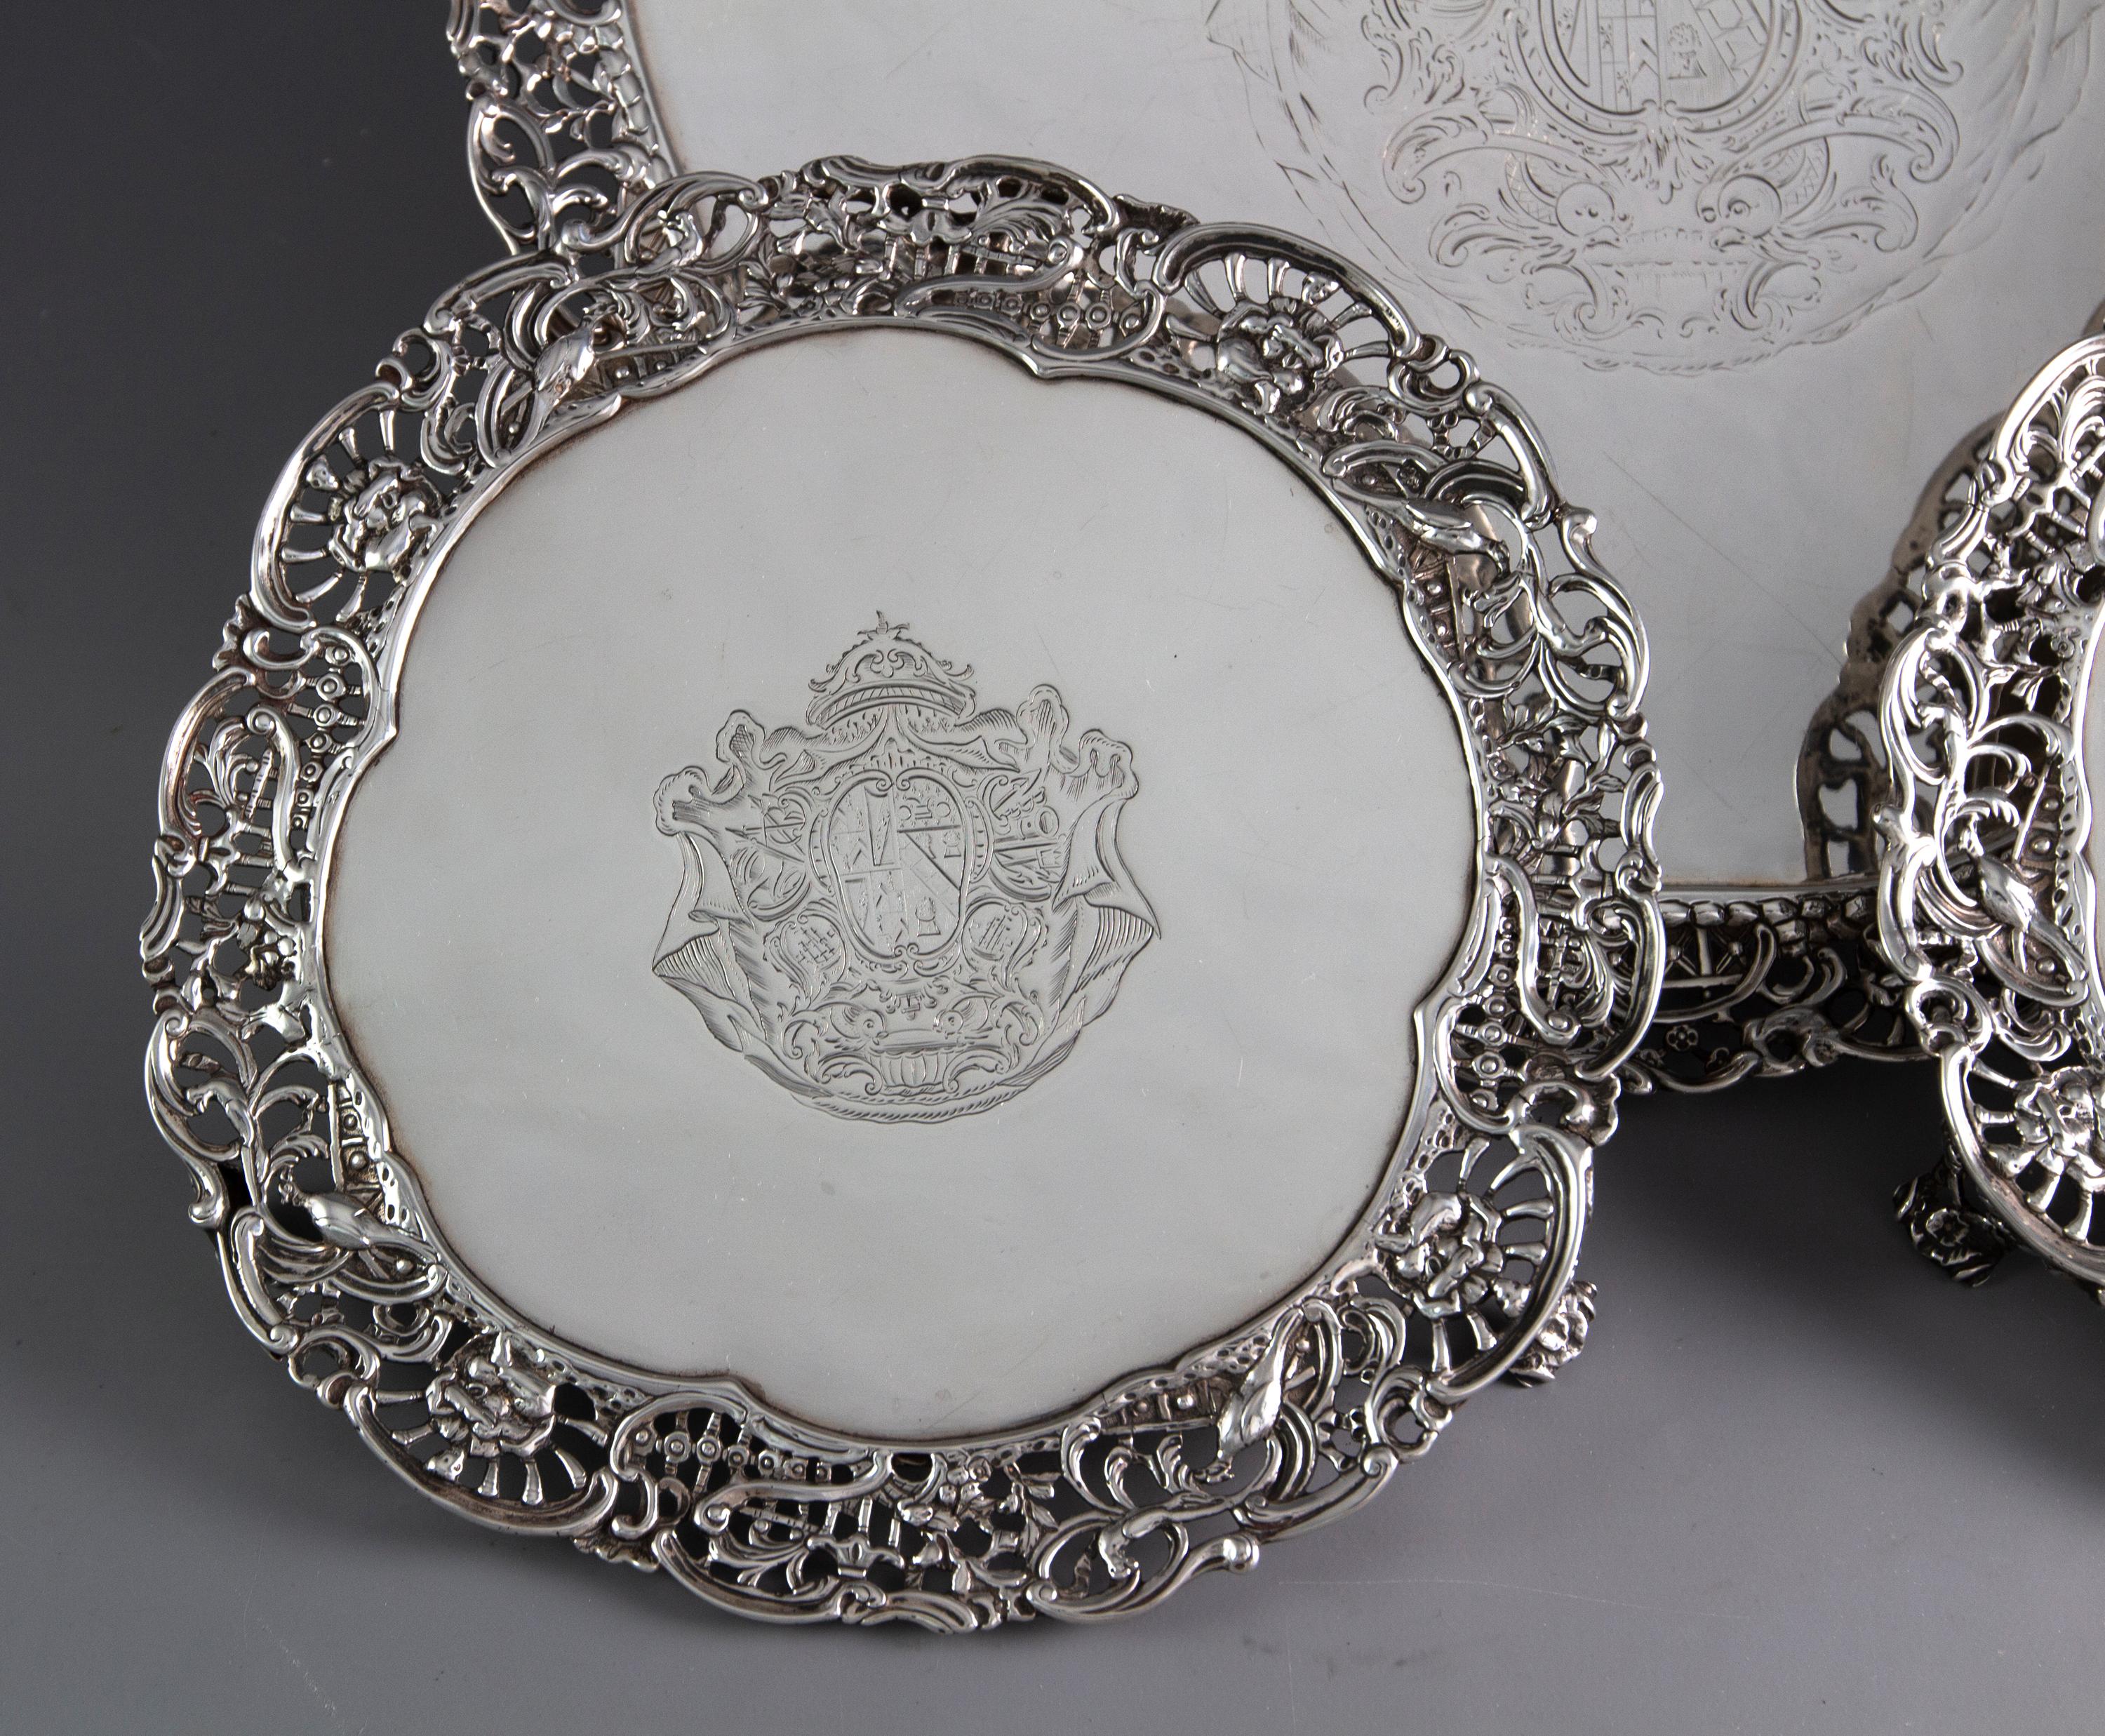 Set of 3 George III Silver Salvers or Trays, London 1762 by Richard Rugg In Good Condition For Sale In Cornwall, GB